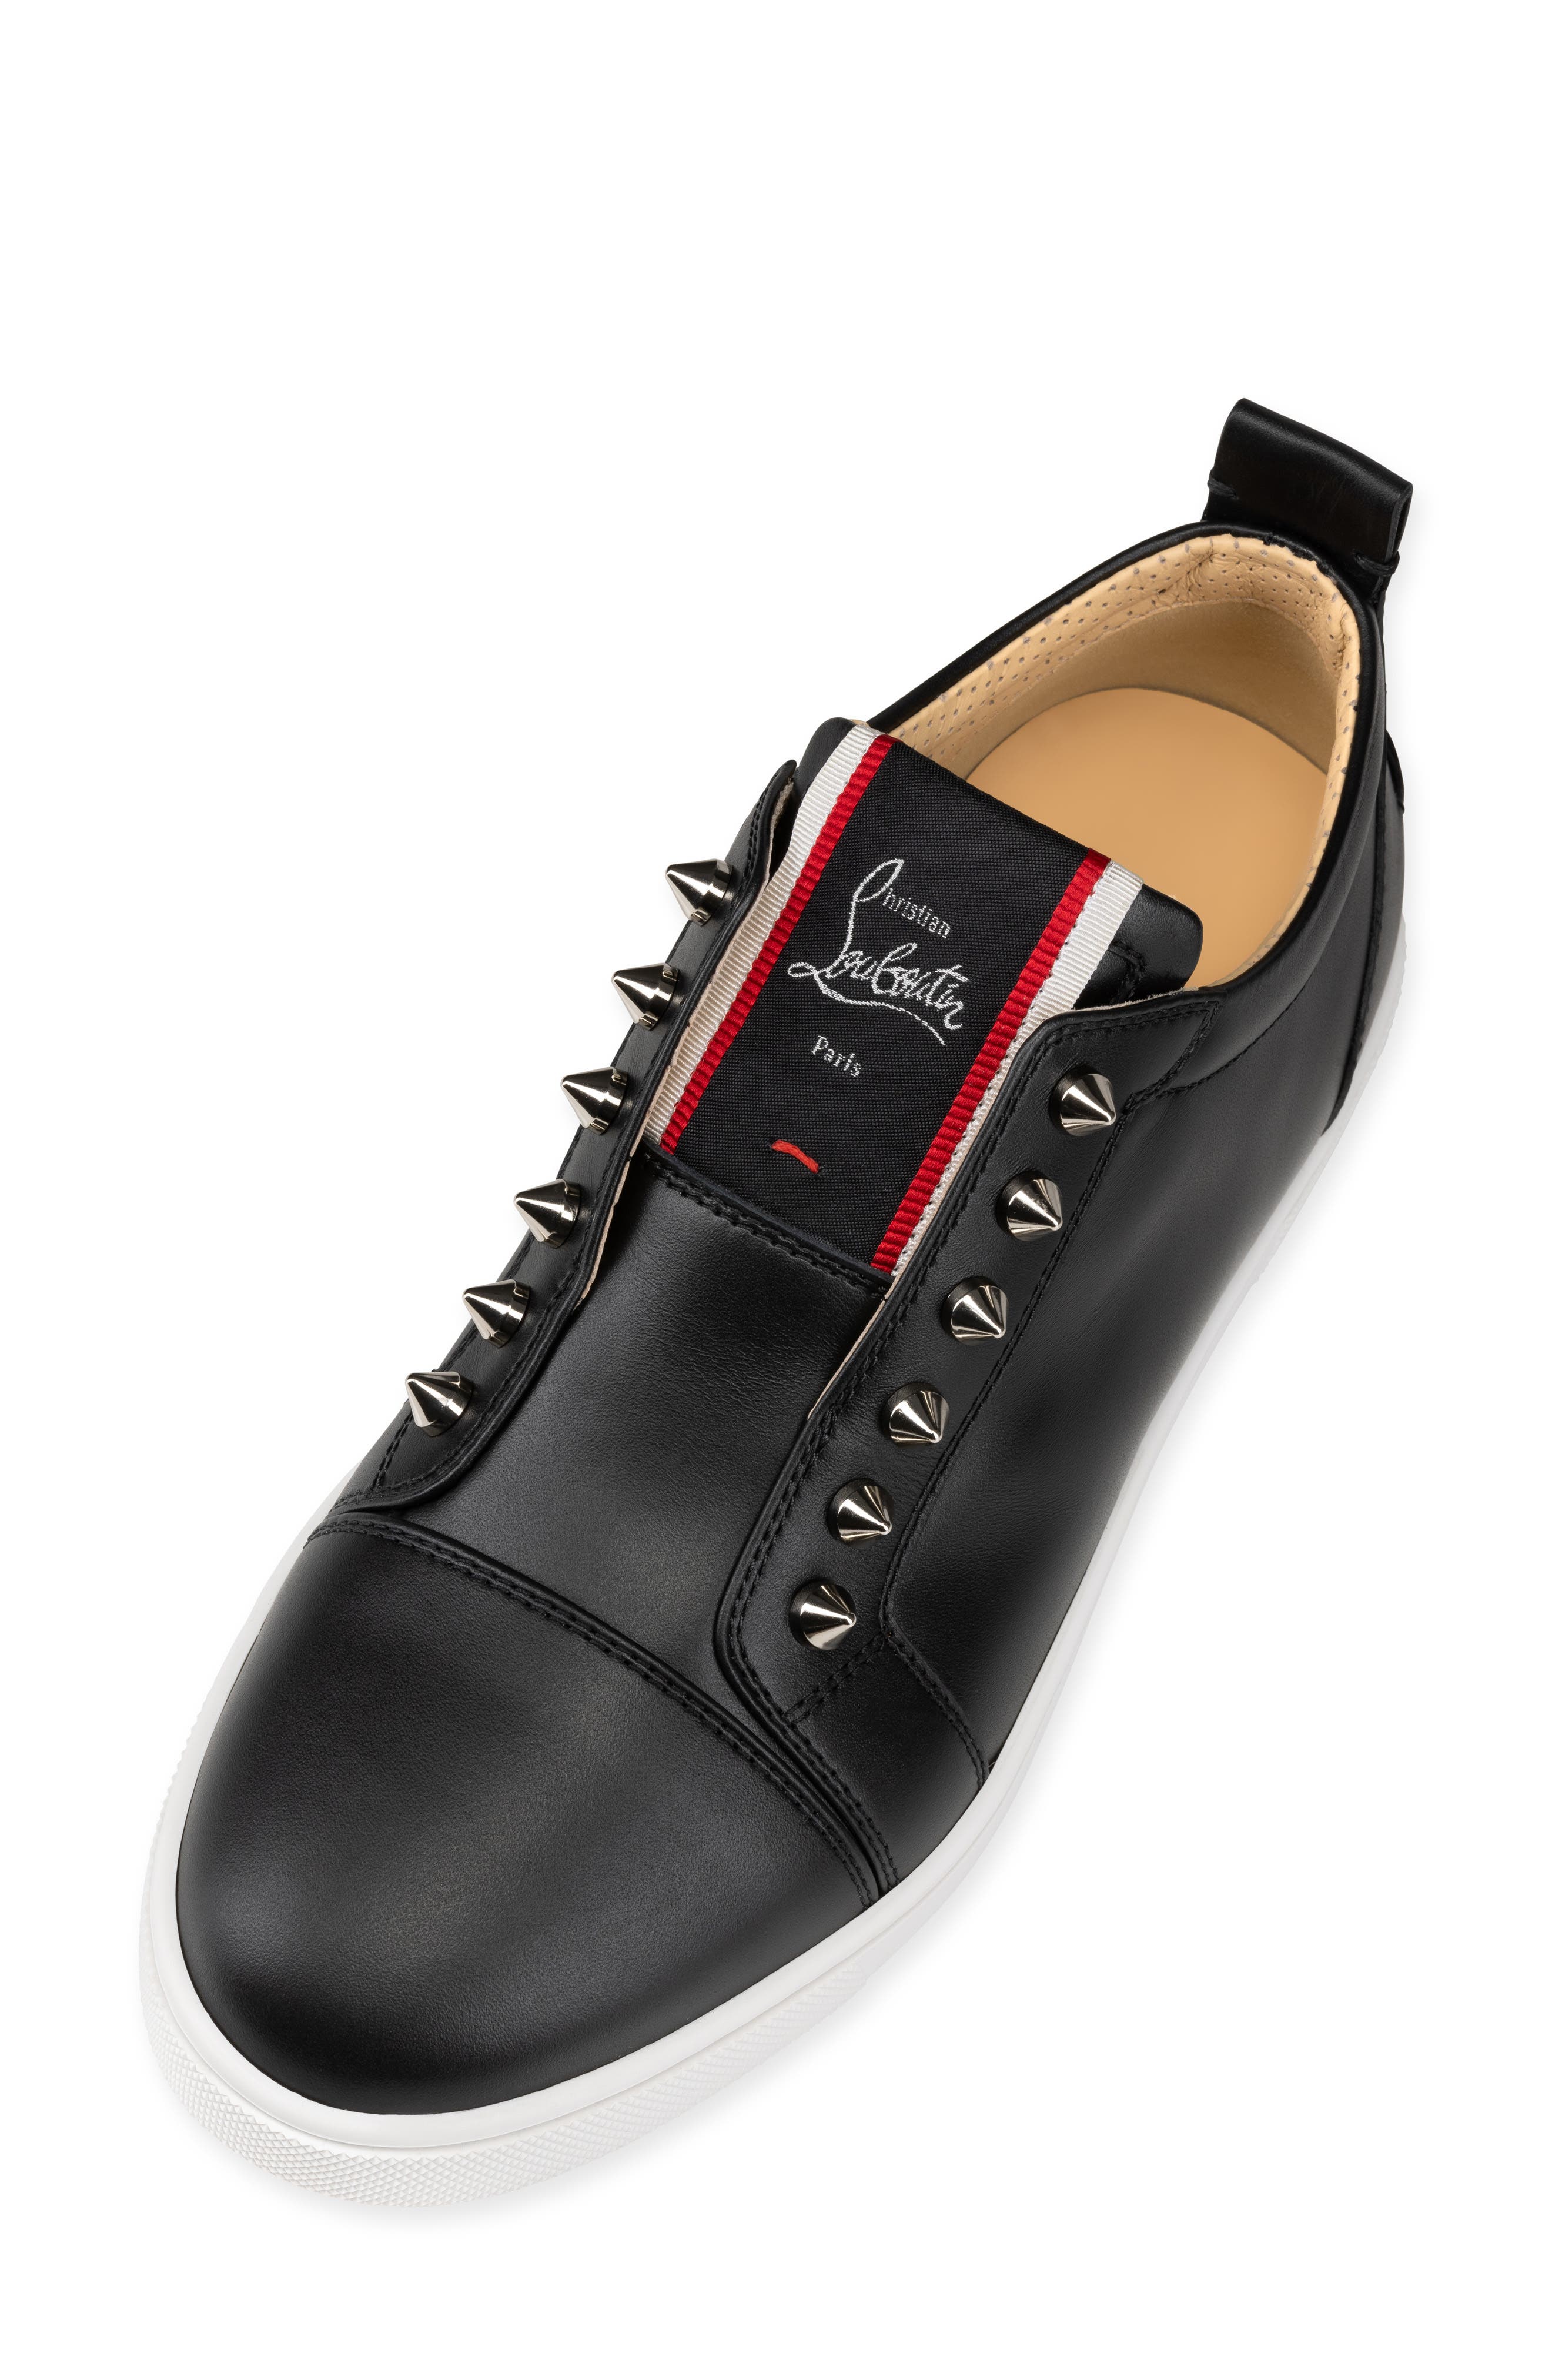 Christian Louboutin F.A.V Fique A Vontade Low Top Sneaker (Women) |  Nordstrom